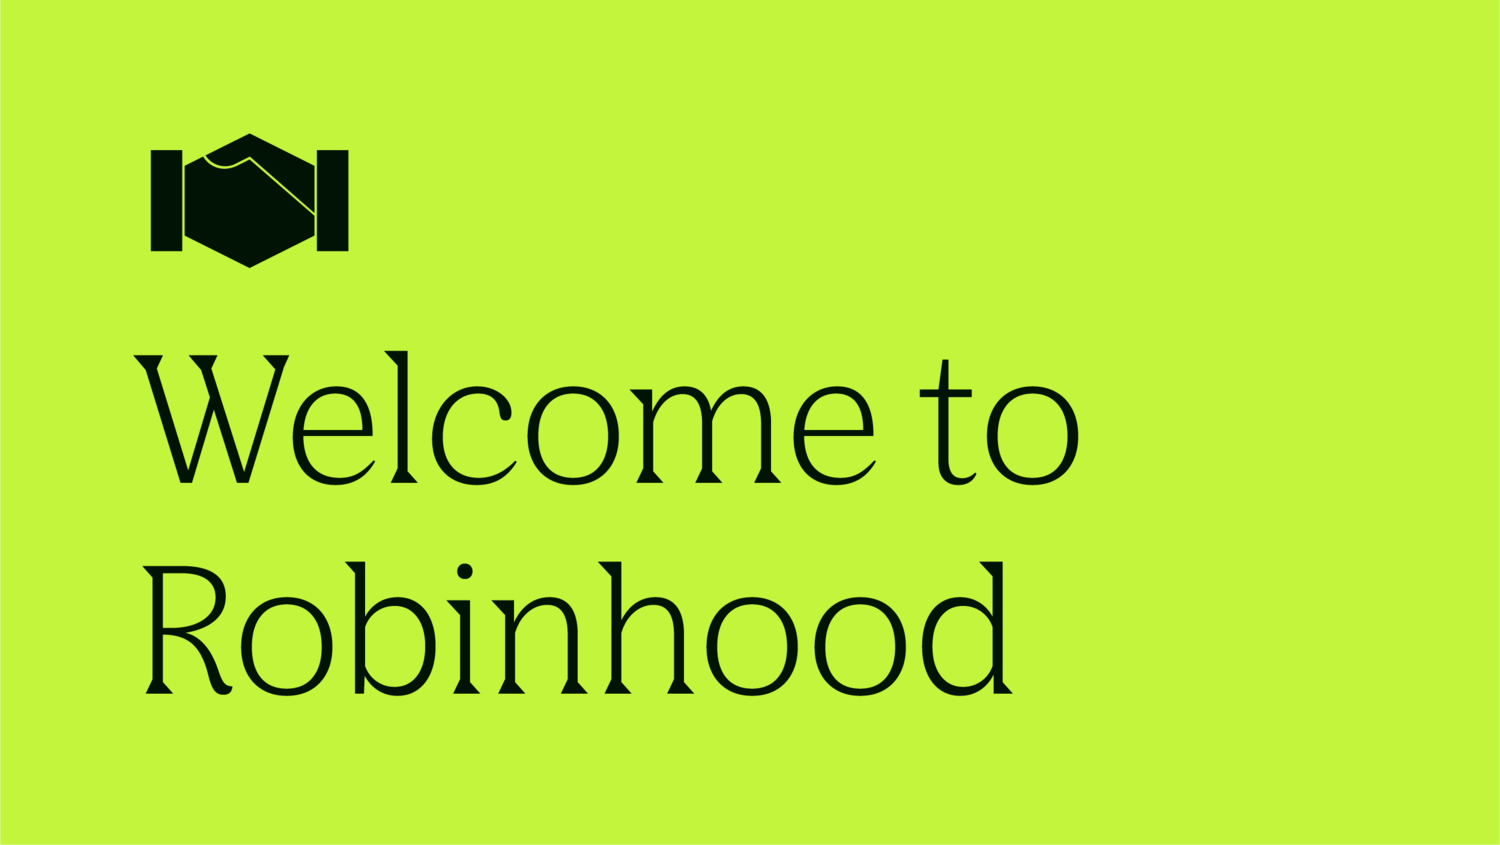 Robinhood Welcomes Aparna Chennapragada as First Chief Product Officer